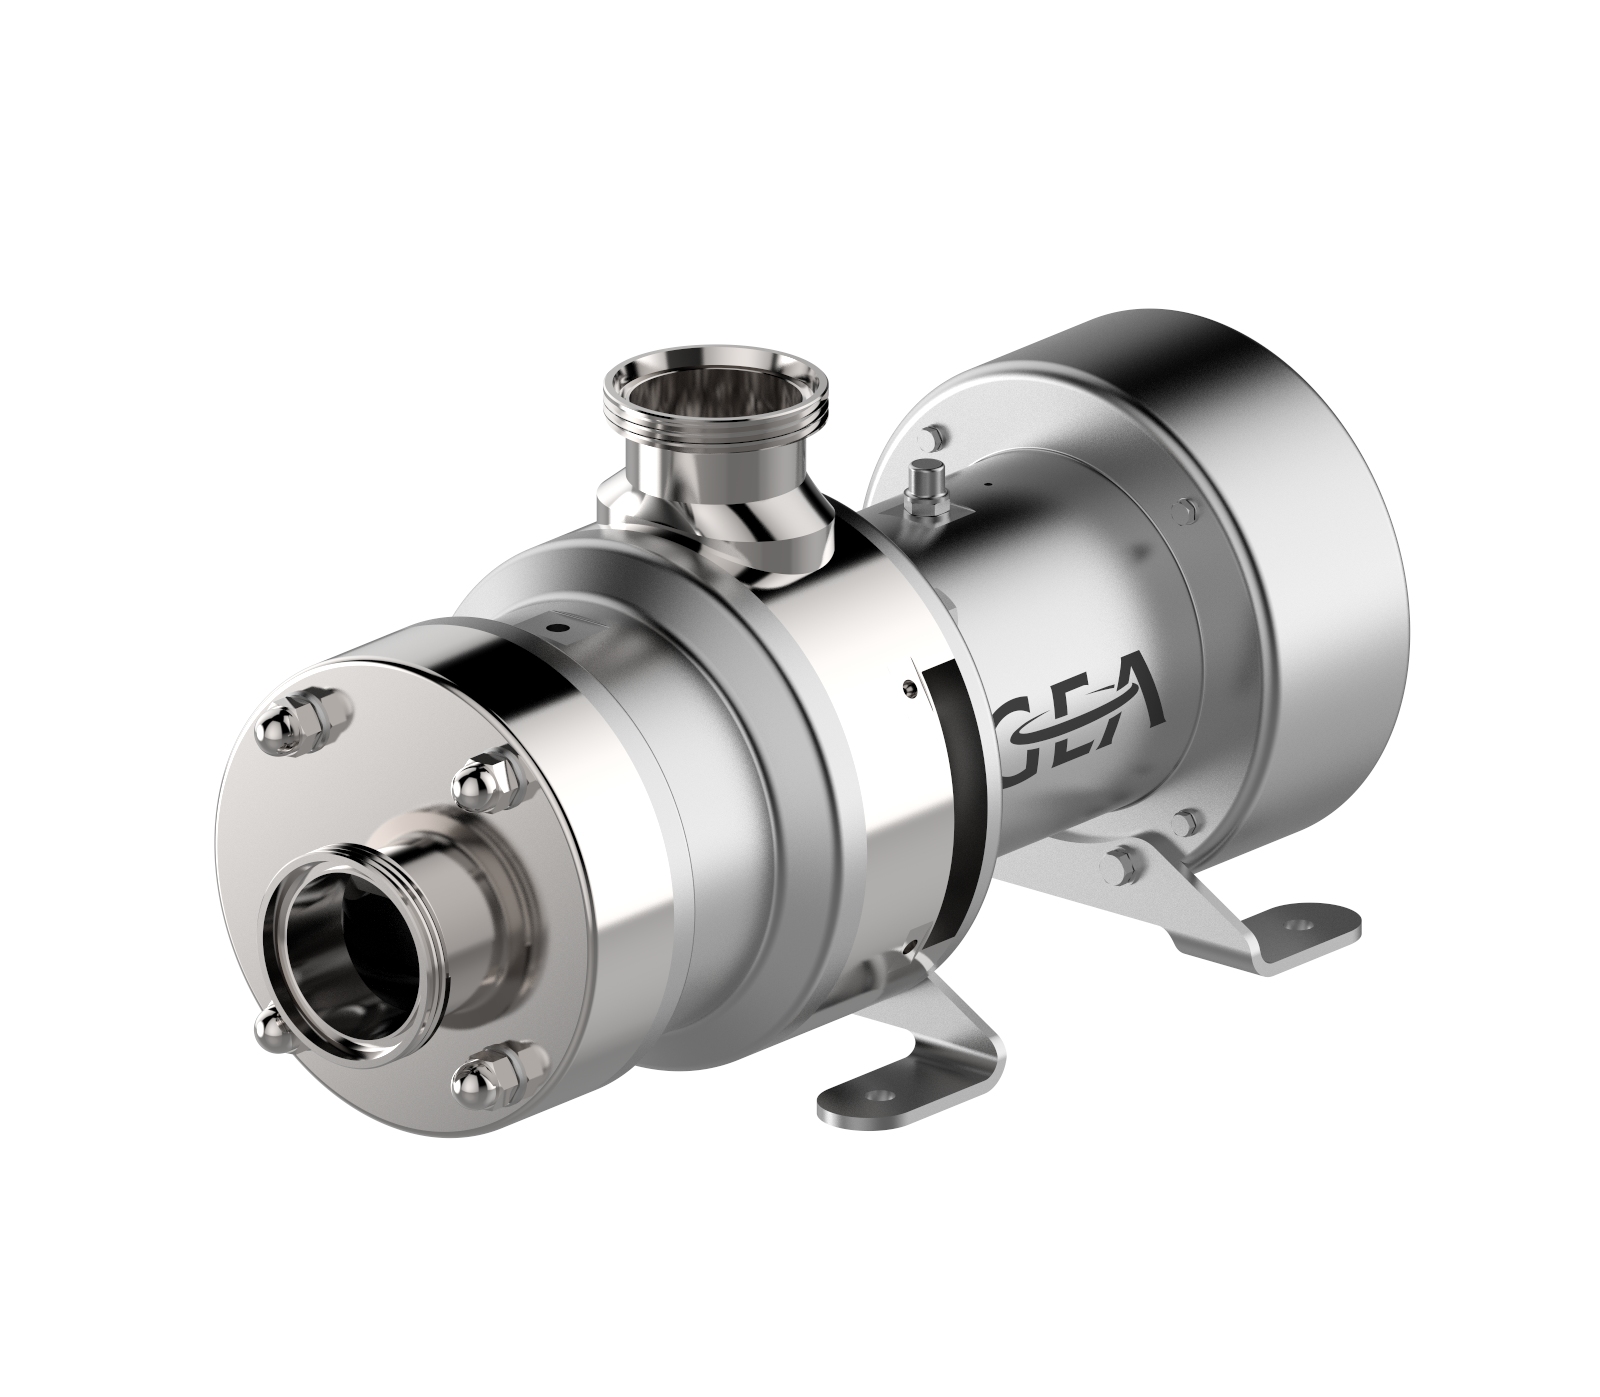 The GEA Hilge Novatwin enables safe operation with low pulsation and low noise levels at high product viscosities.